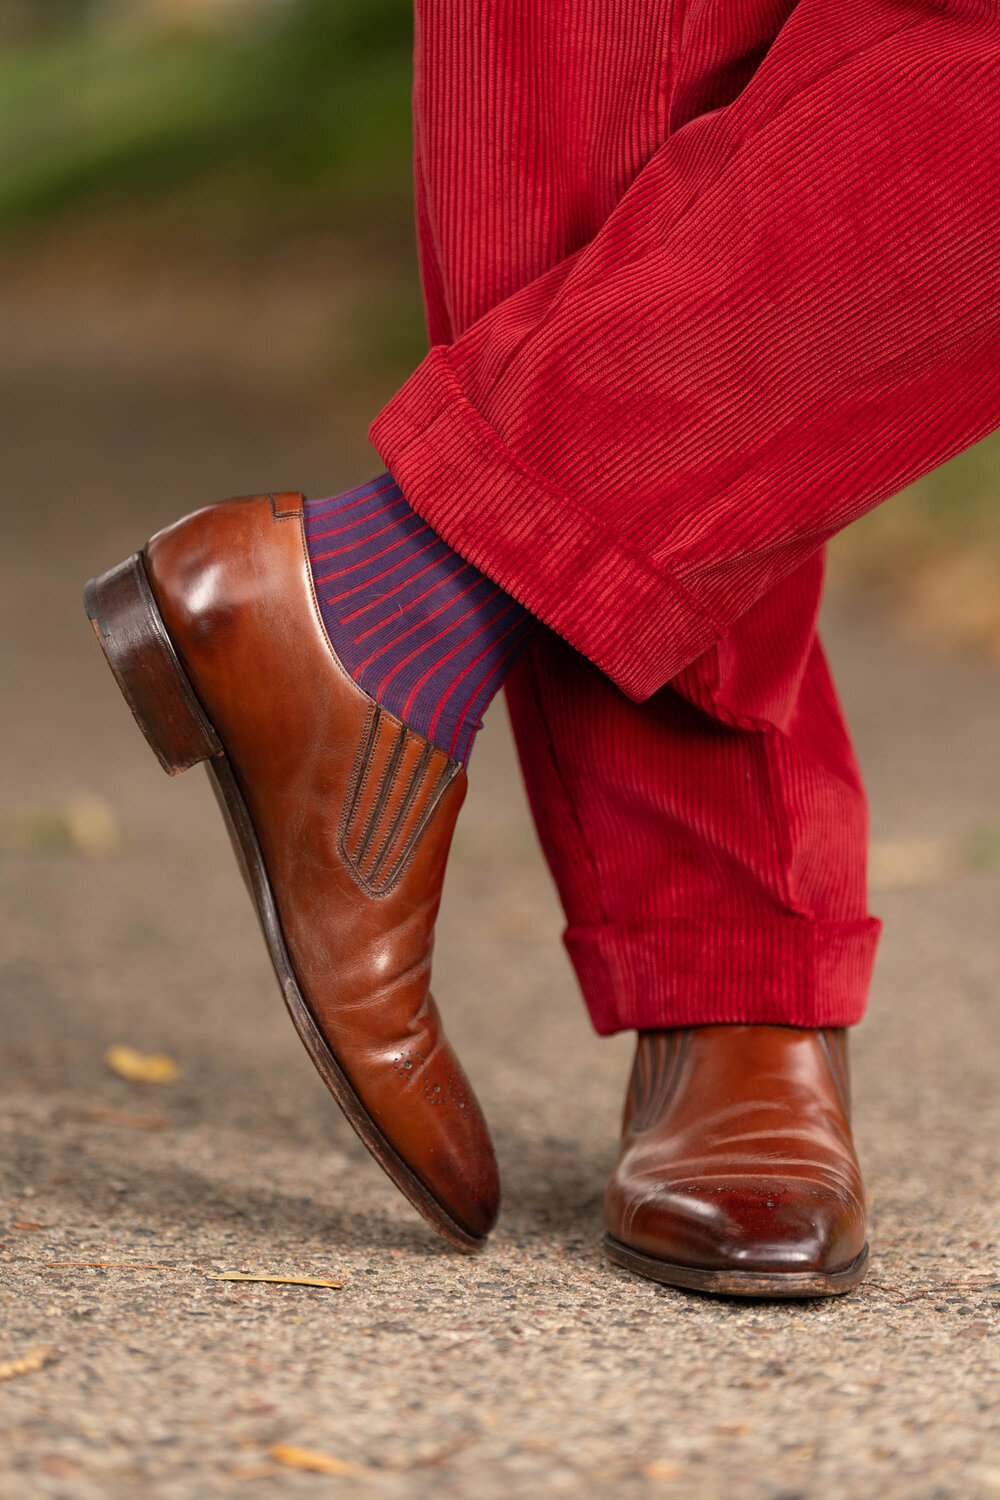 Garnet Red corduroy trousers paired with shadow striped socks-_R5_9128